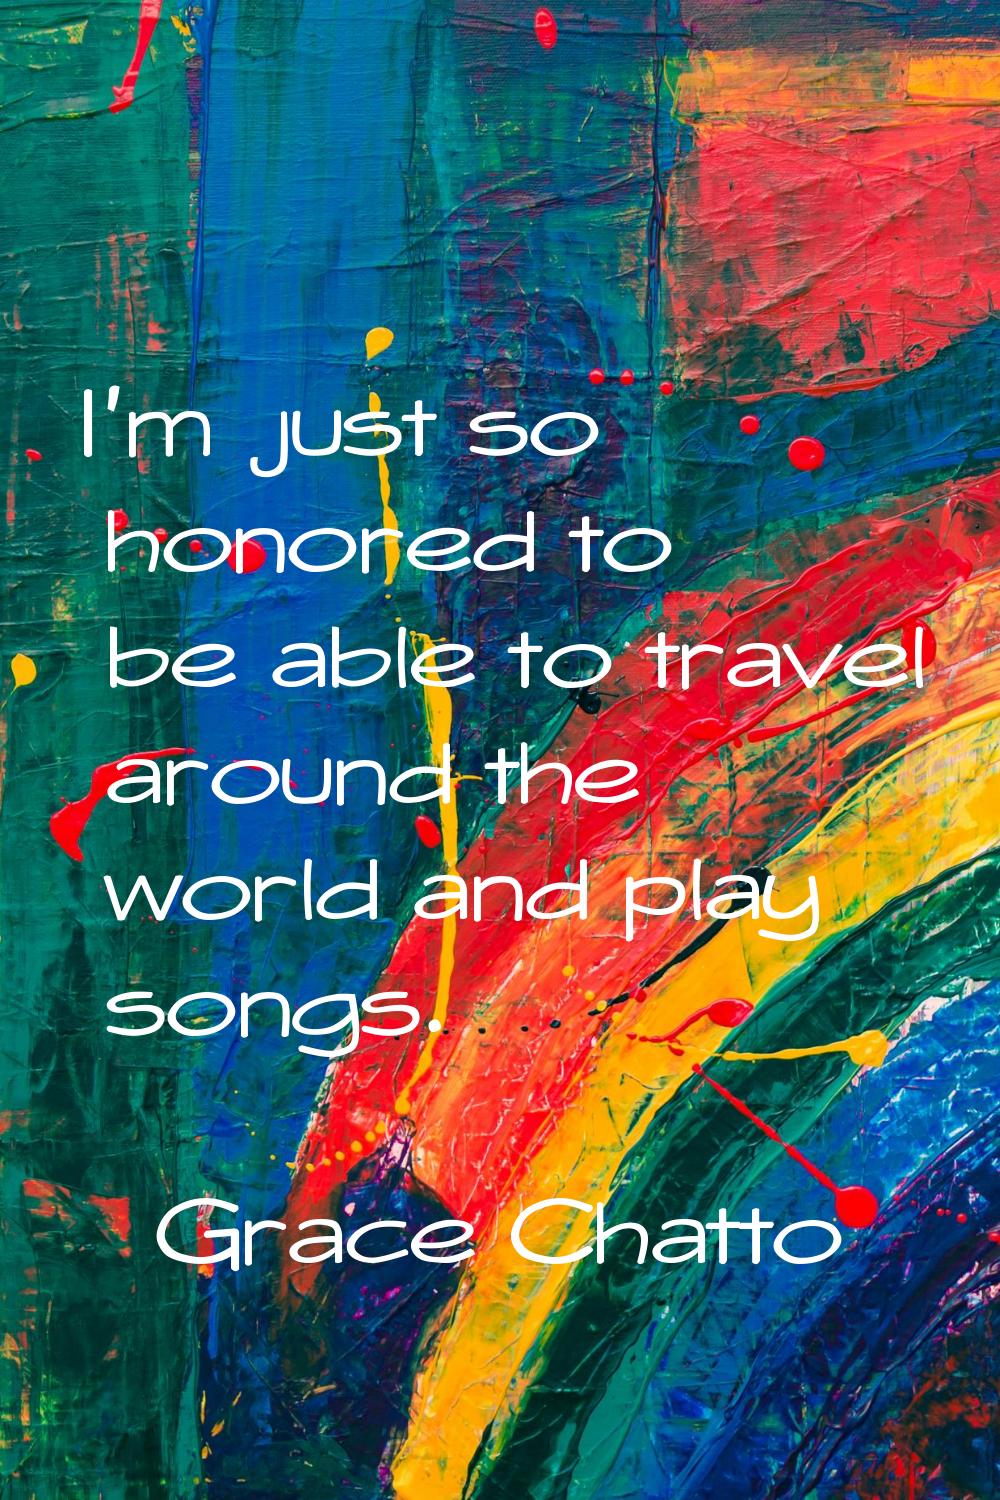 I'm just so honored to be able to travel around the world and play songs.